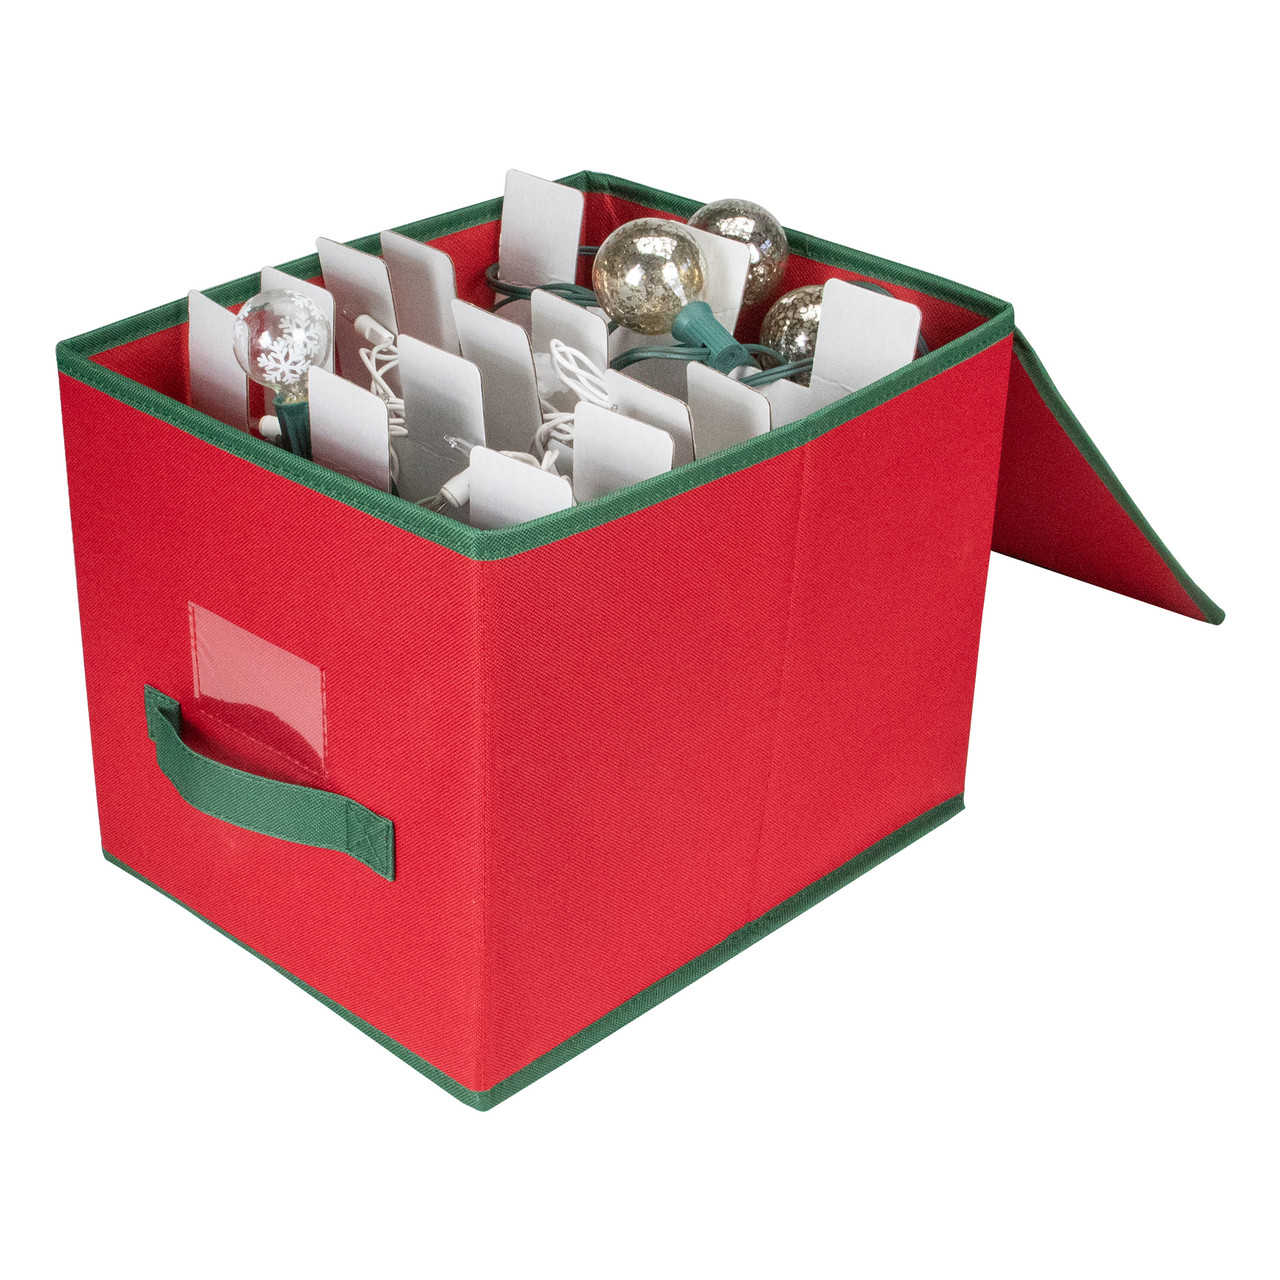 13” Red & Green Christmas Ornament Storage Box with Removable Dividers